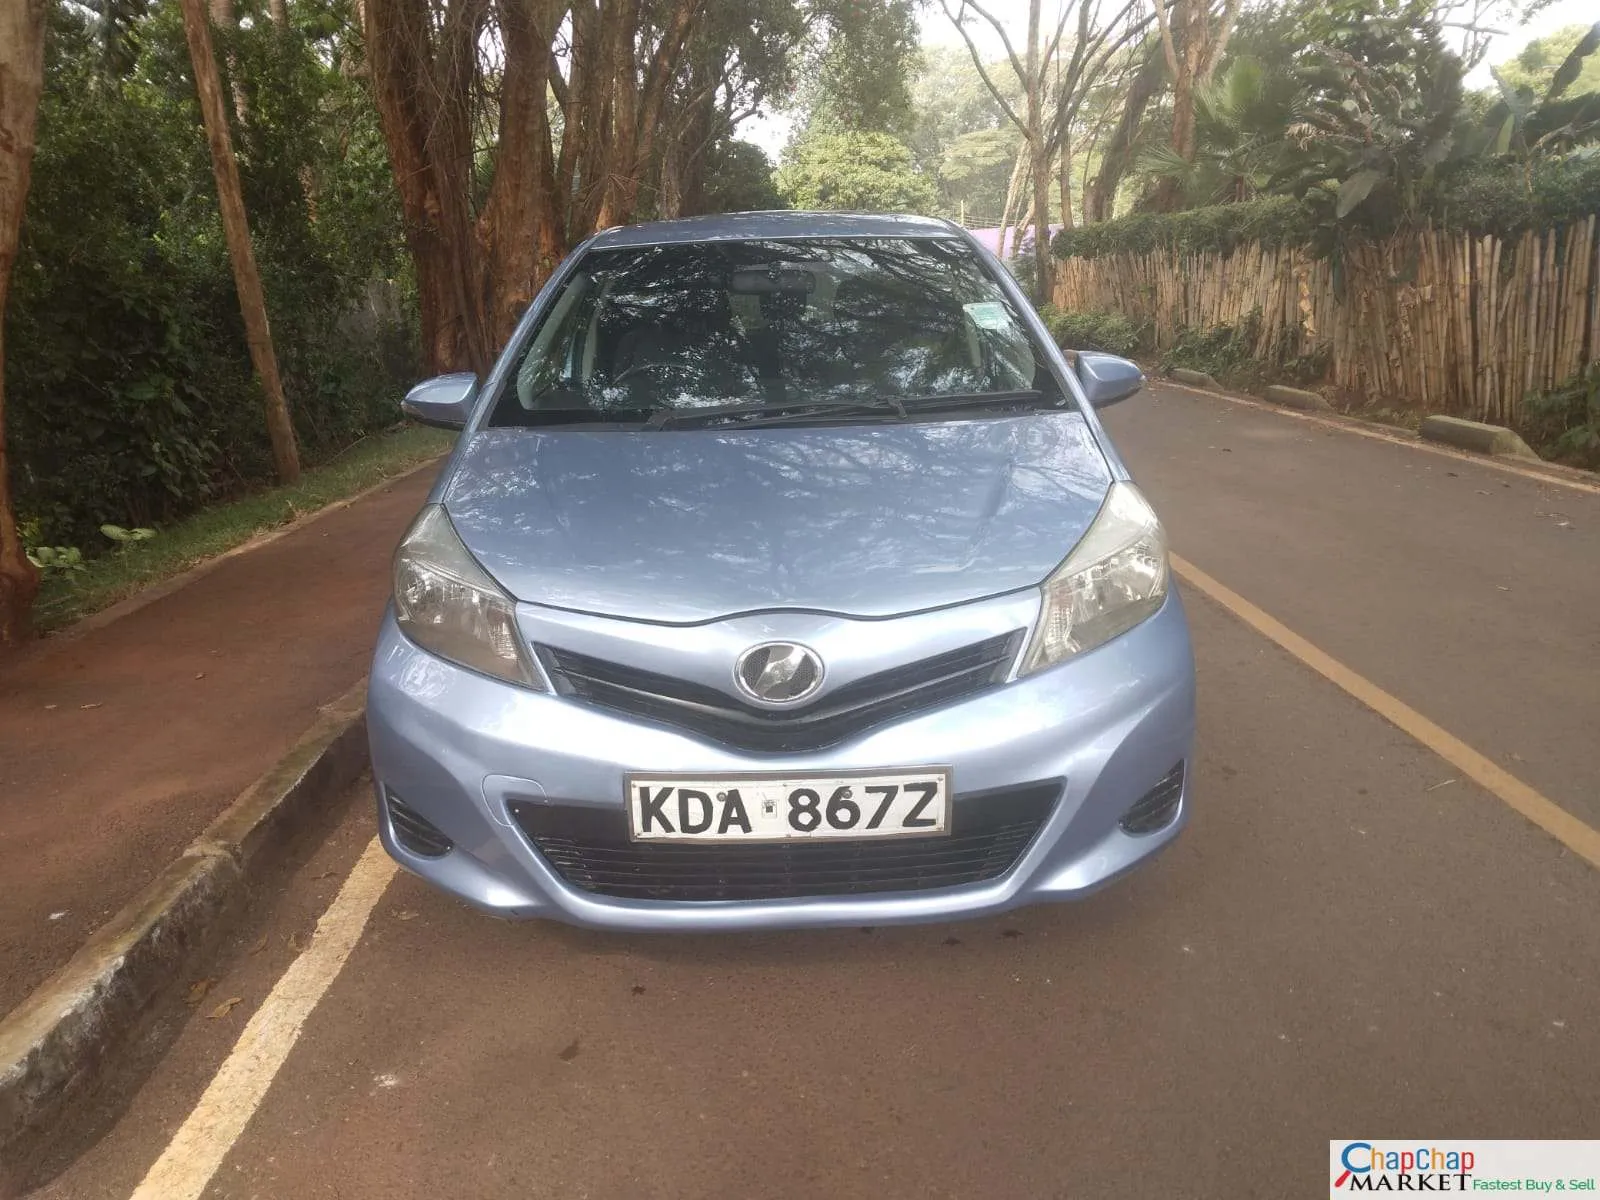 Toyota Vitz 1300cc for sale in Kenya 🔥 You Pay 30% Deposit Trade in OK EXCLUSIVE